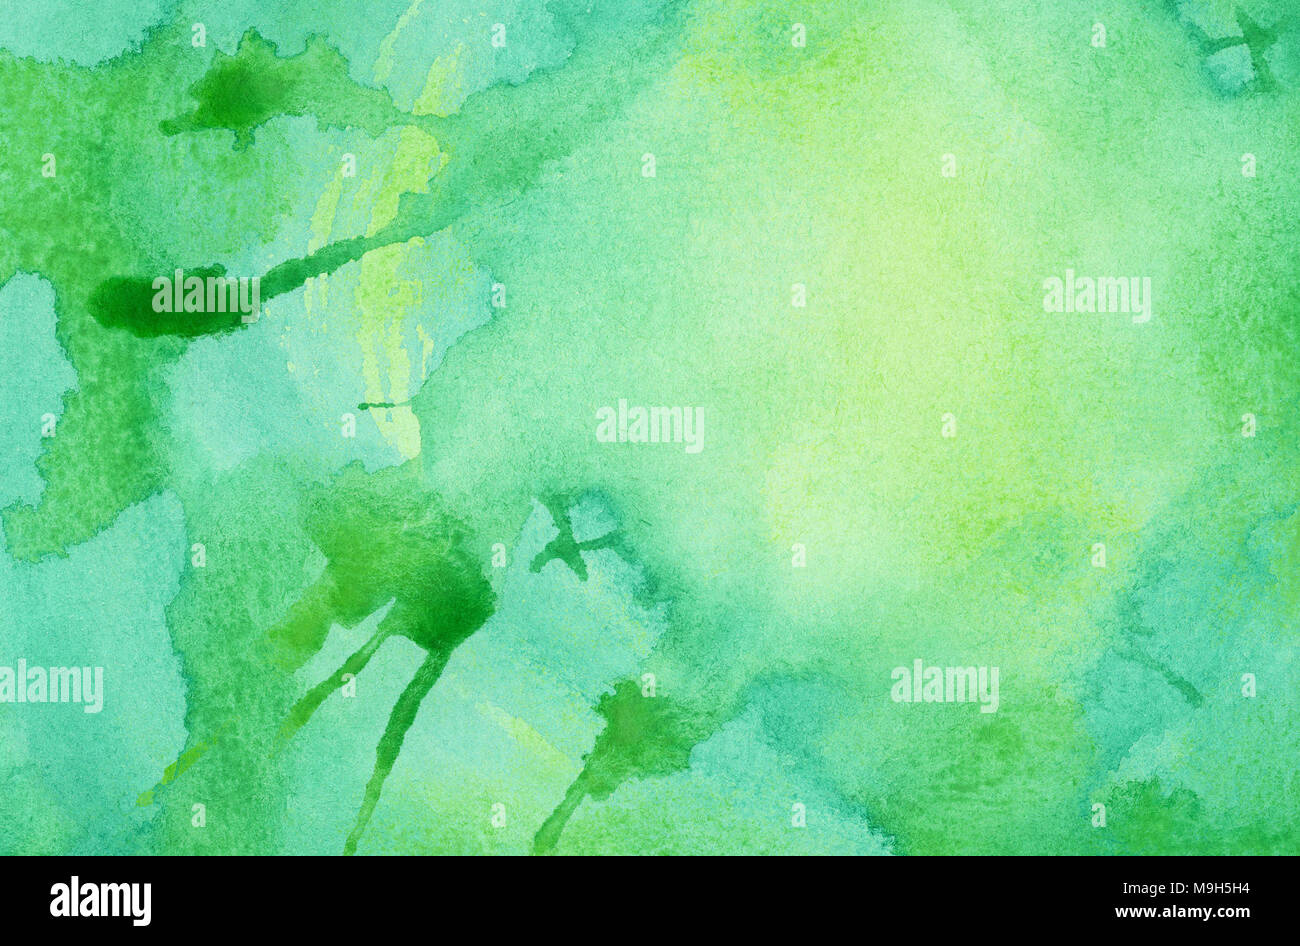 Abstract bright green watercolor splash background, painted on watercolor paper Stock Photo